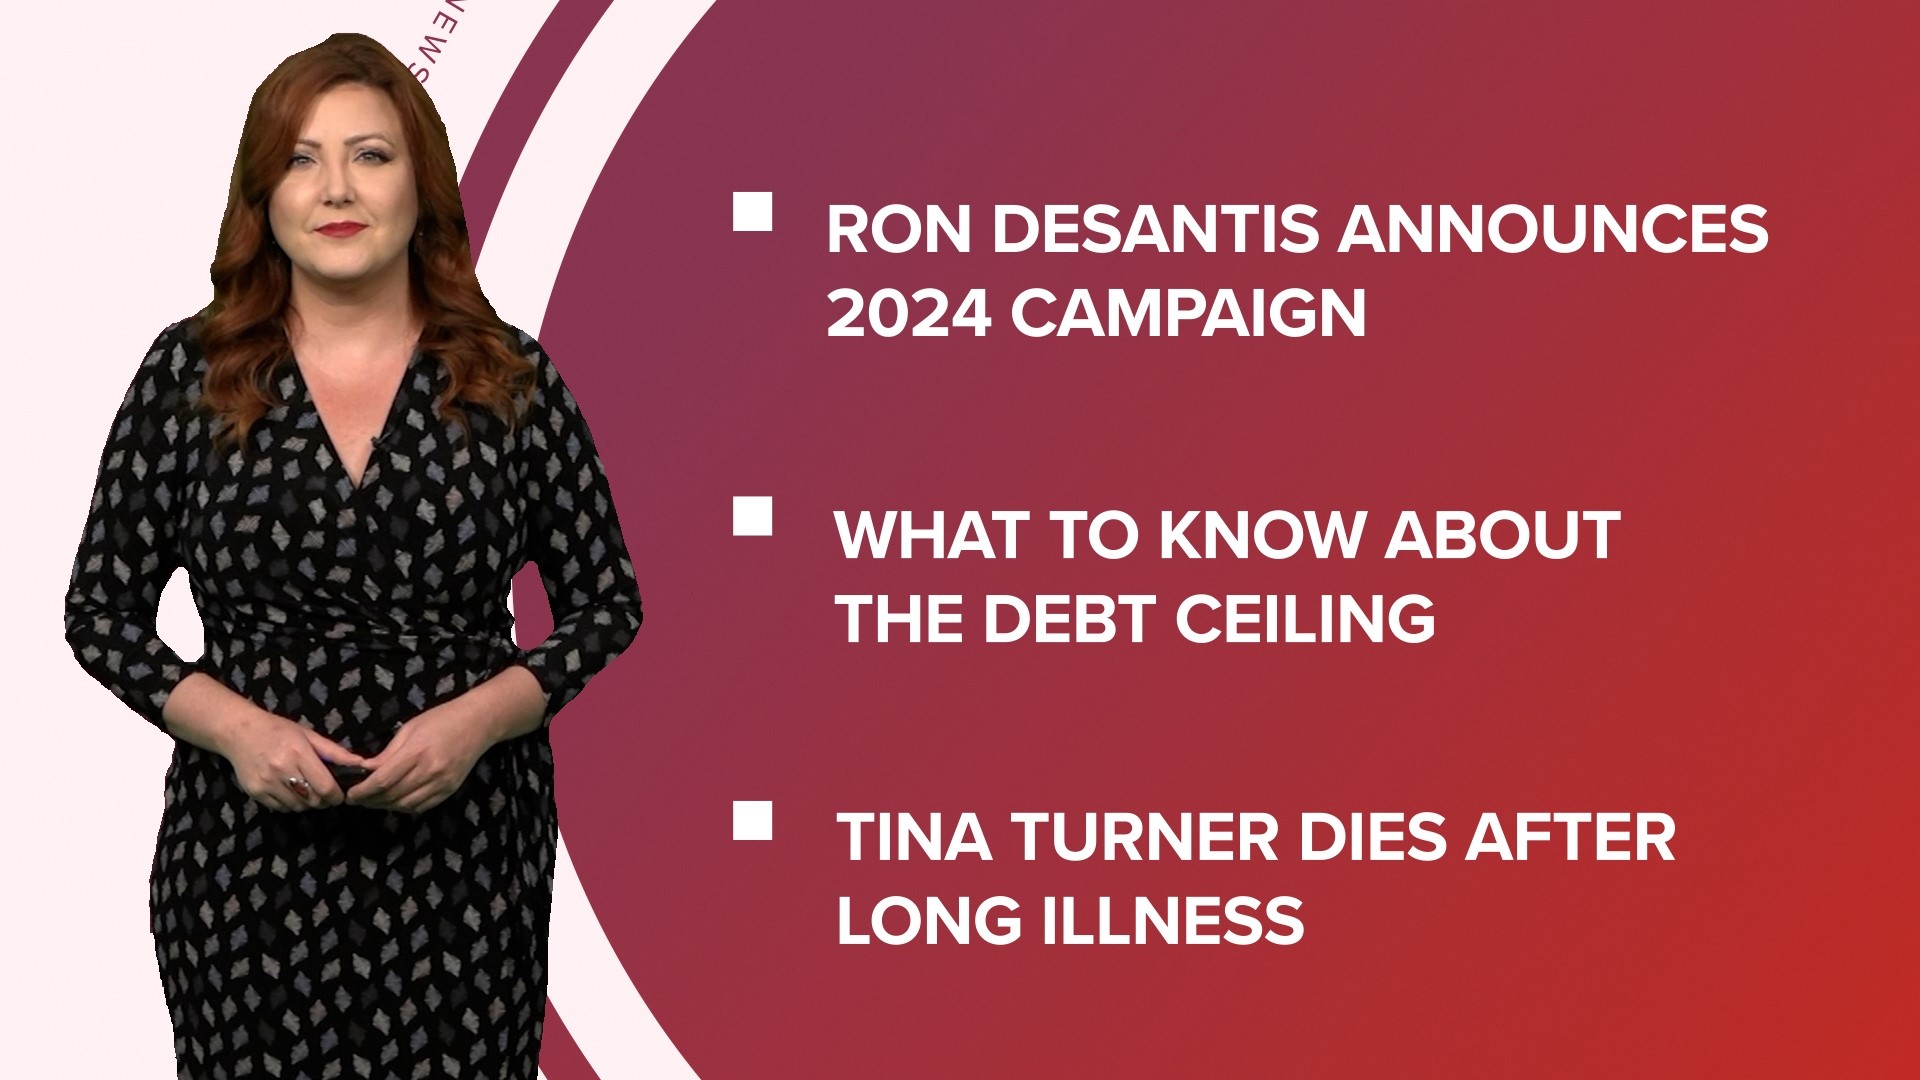 A look at what is happening in the news from Ron DeSantis announcing his 2024 presidential campaign to Tina Turner dying from a long illness at 83.